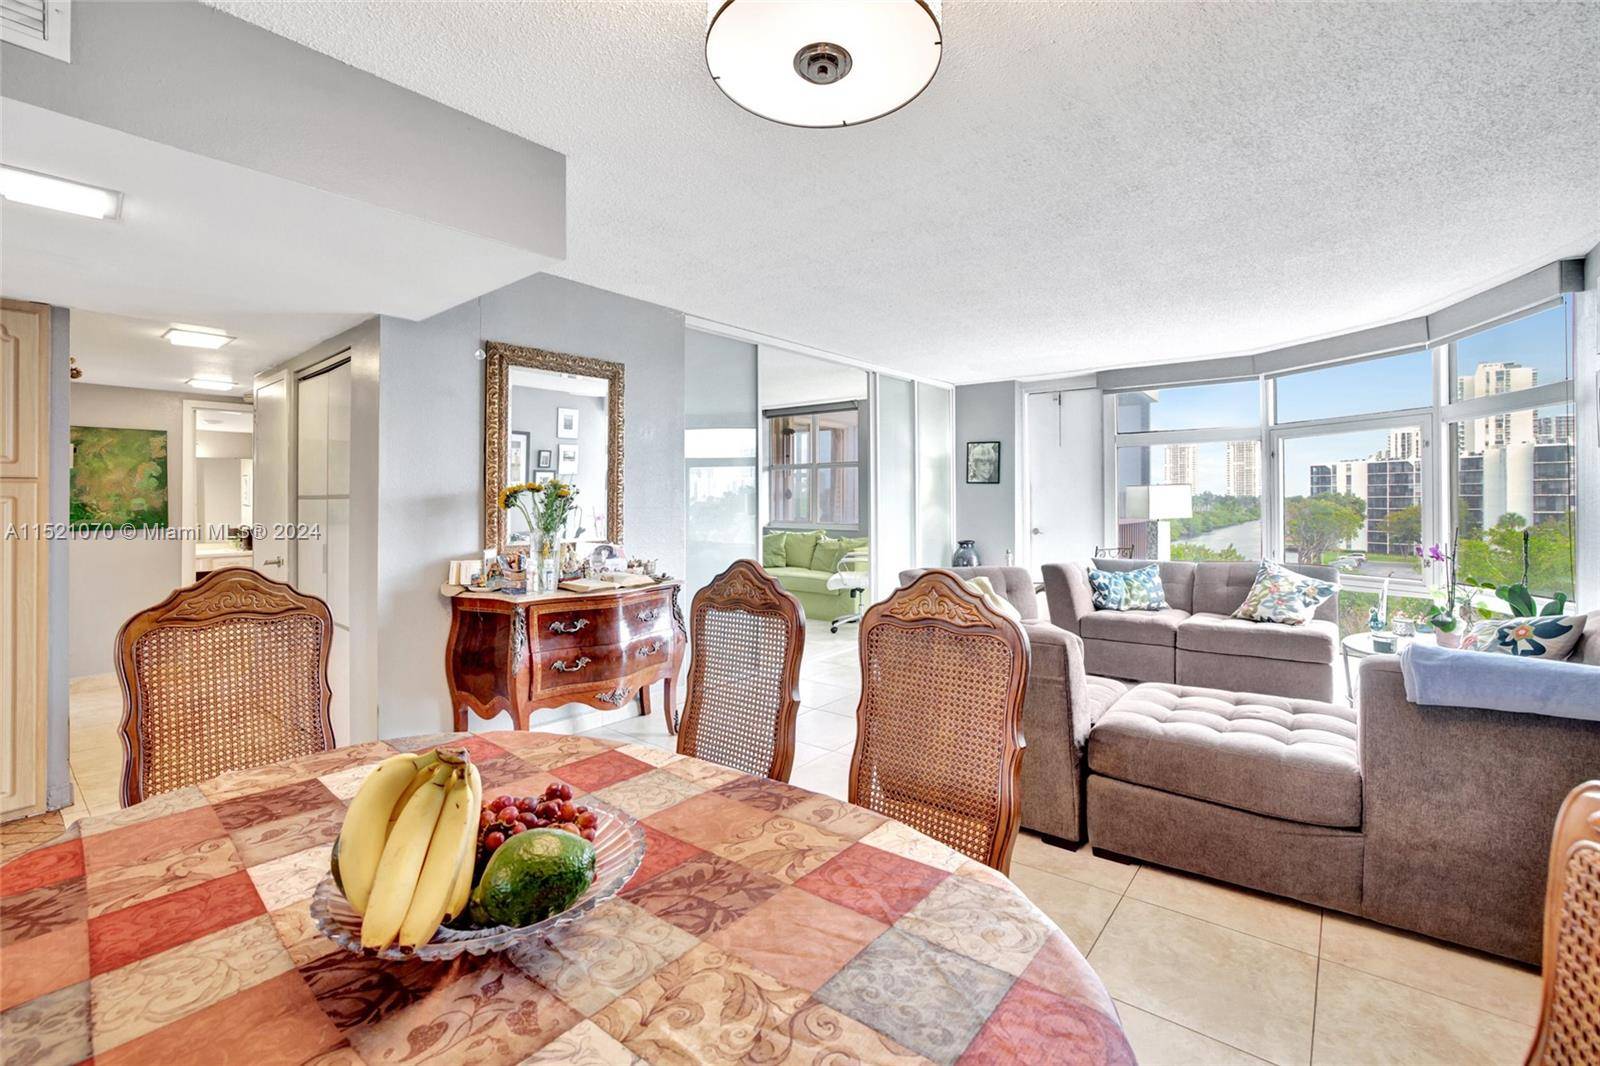 Live in a prime Aventura location on The Circle, a 3 mile exercise path circling the Turnberry Golf Course.